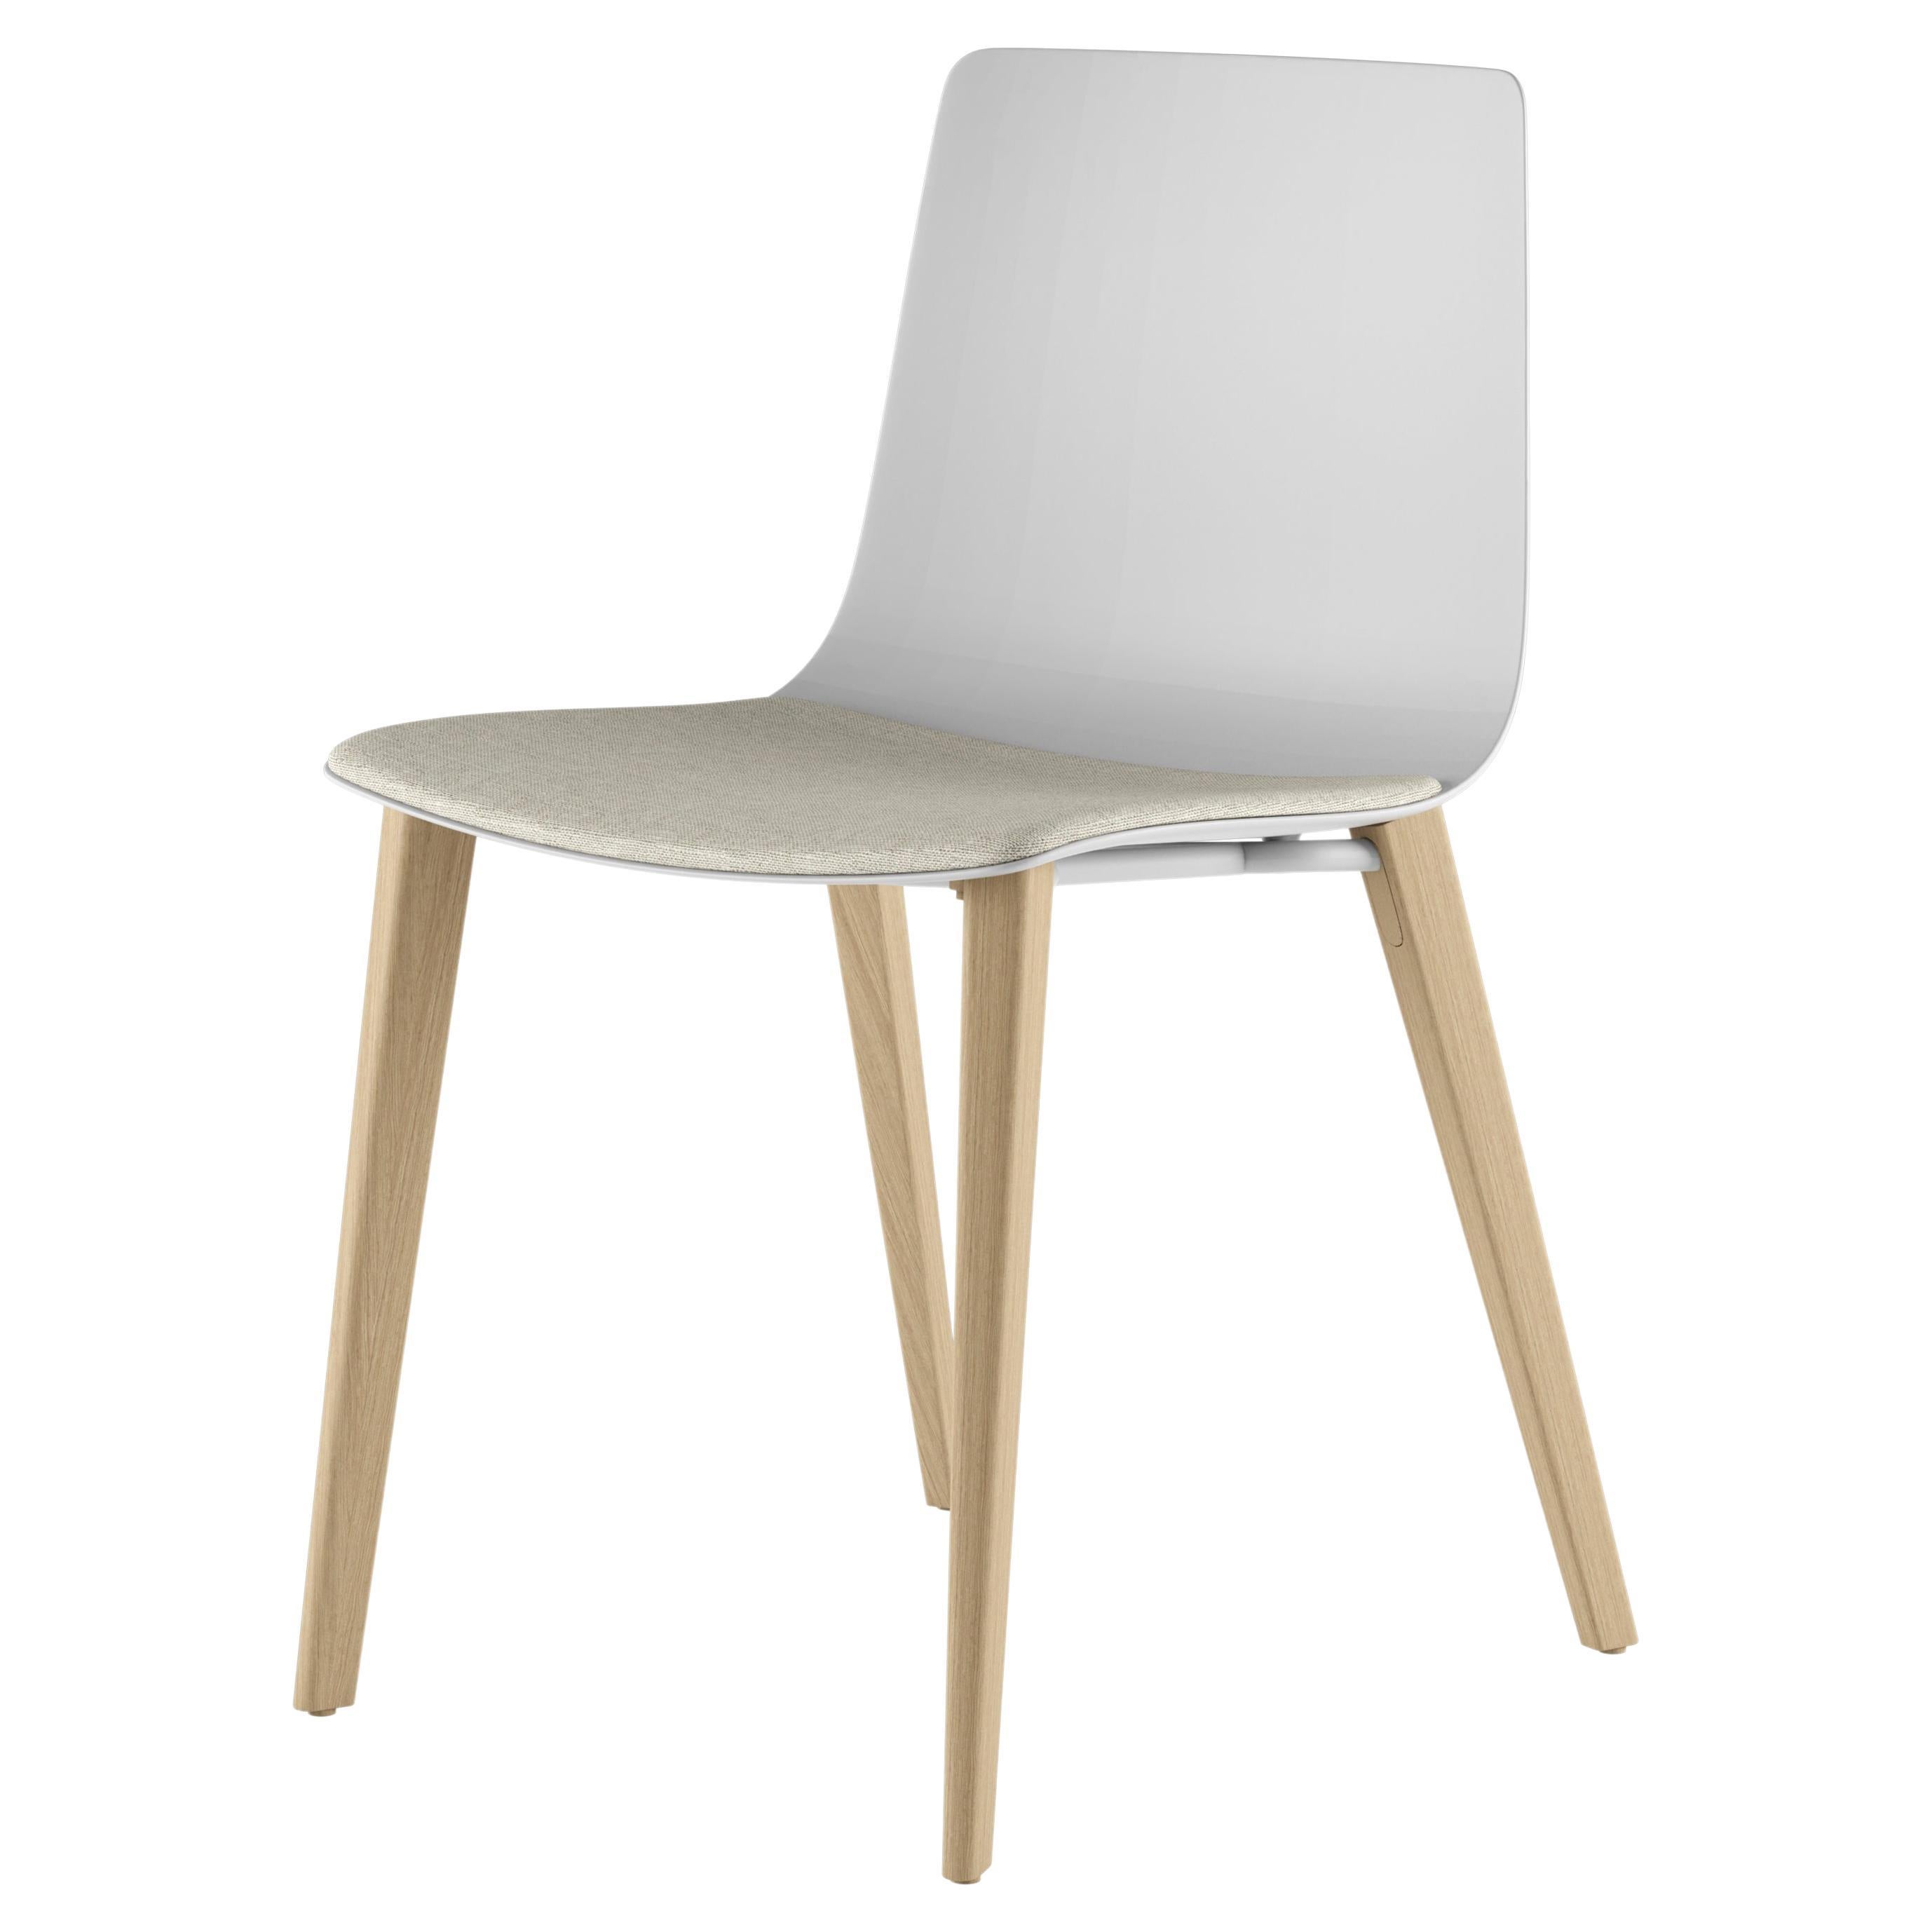 Alias 89E Slim Chair Wood Soft with Small Pad in Beige and Natural Oak Frame For Sale